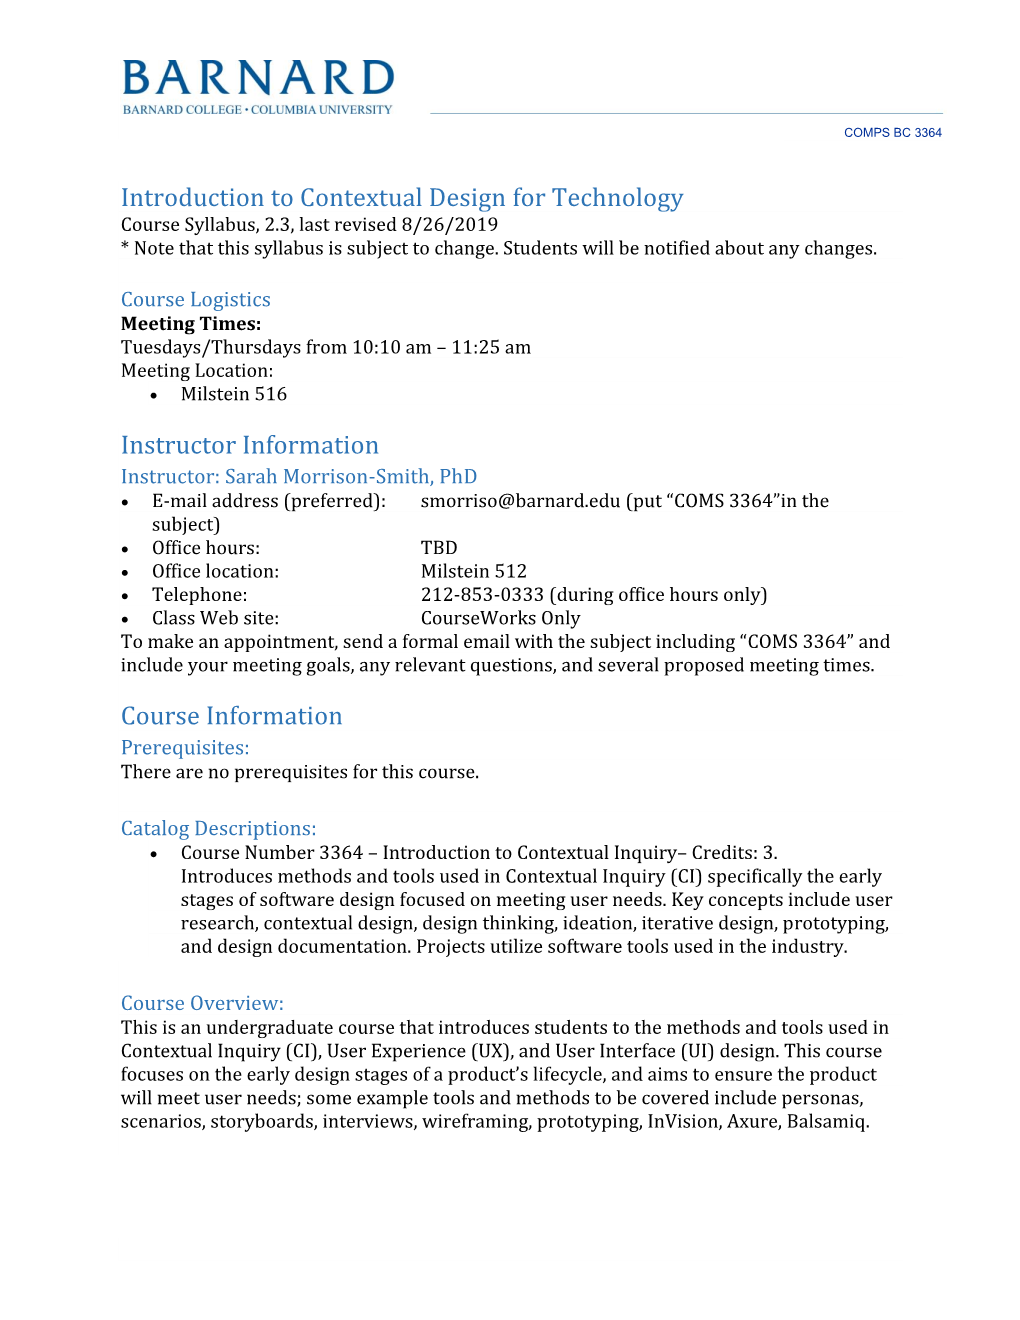 Introduction to Contextual Design for Technology Instructor Information